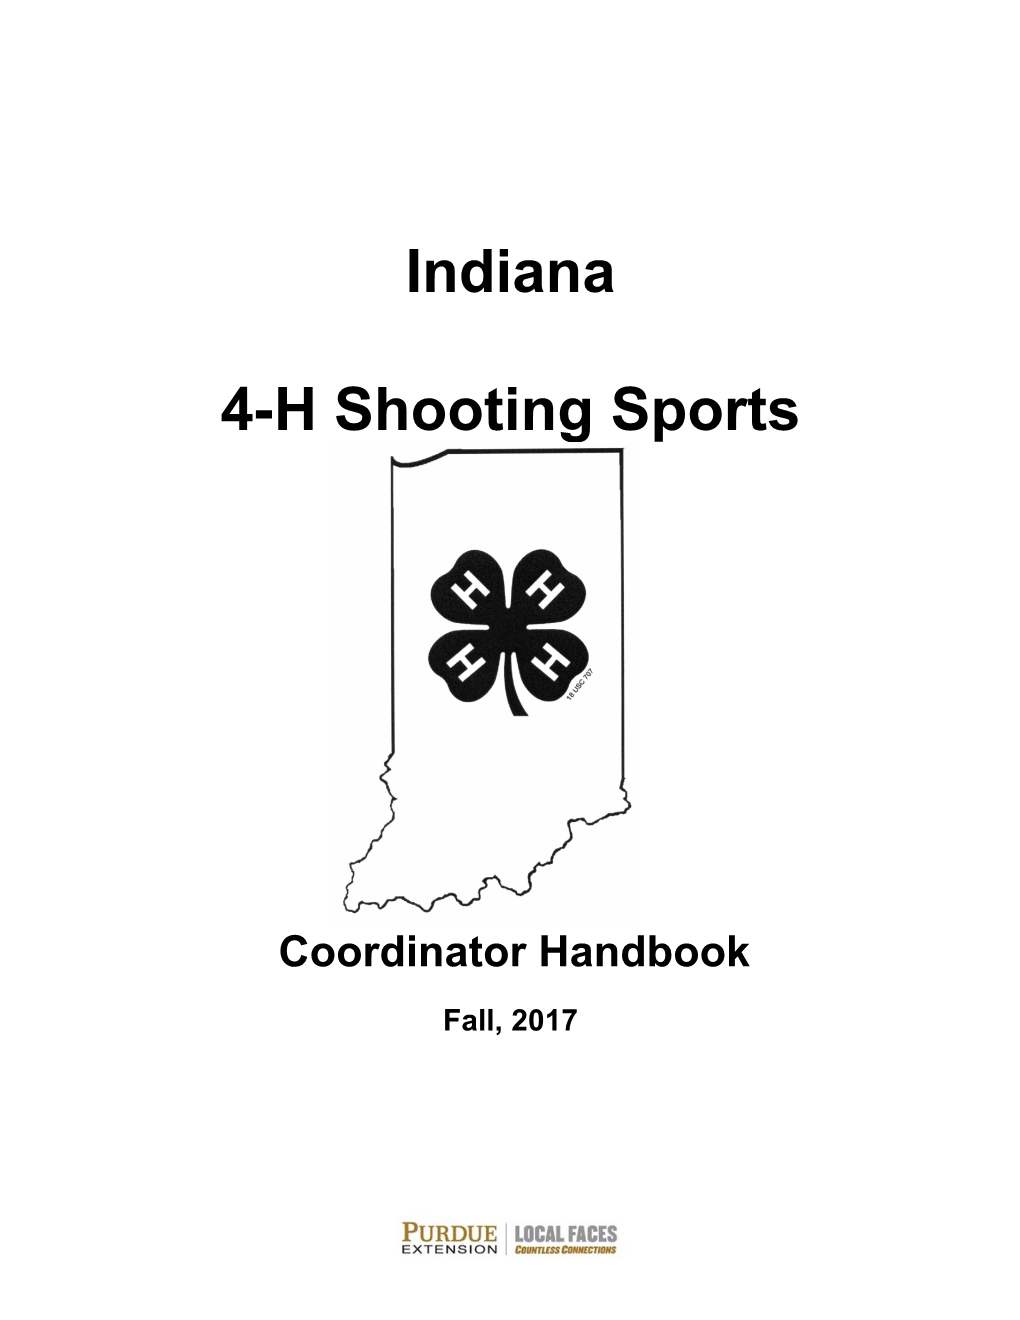 Indiana 4-H Shooting Sports Project Website